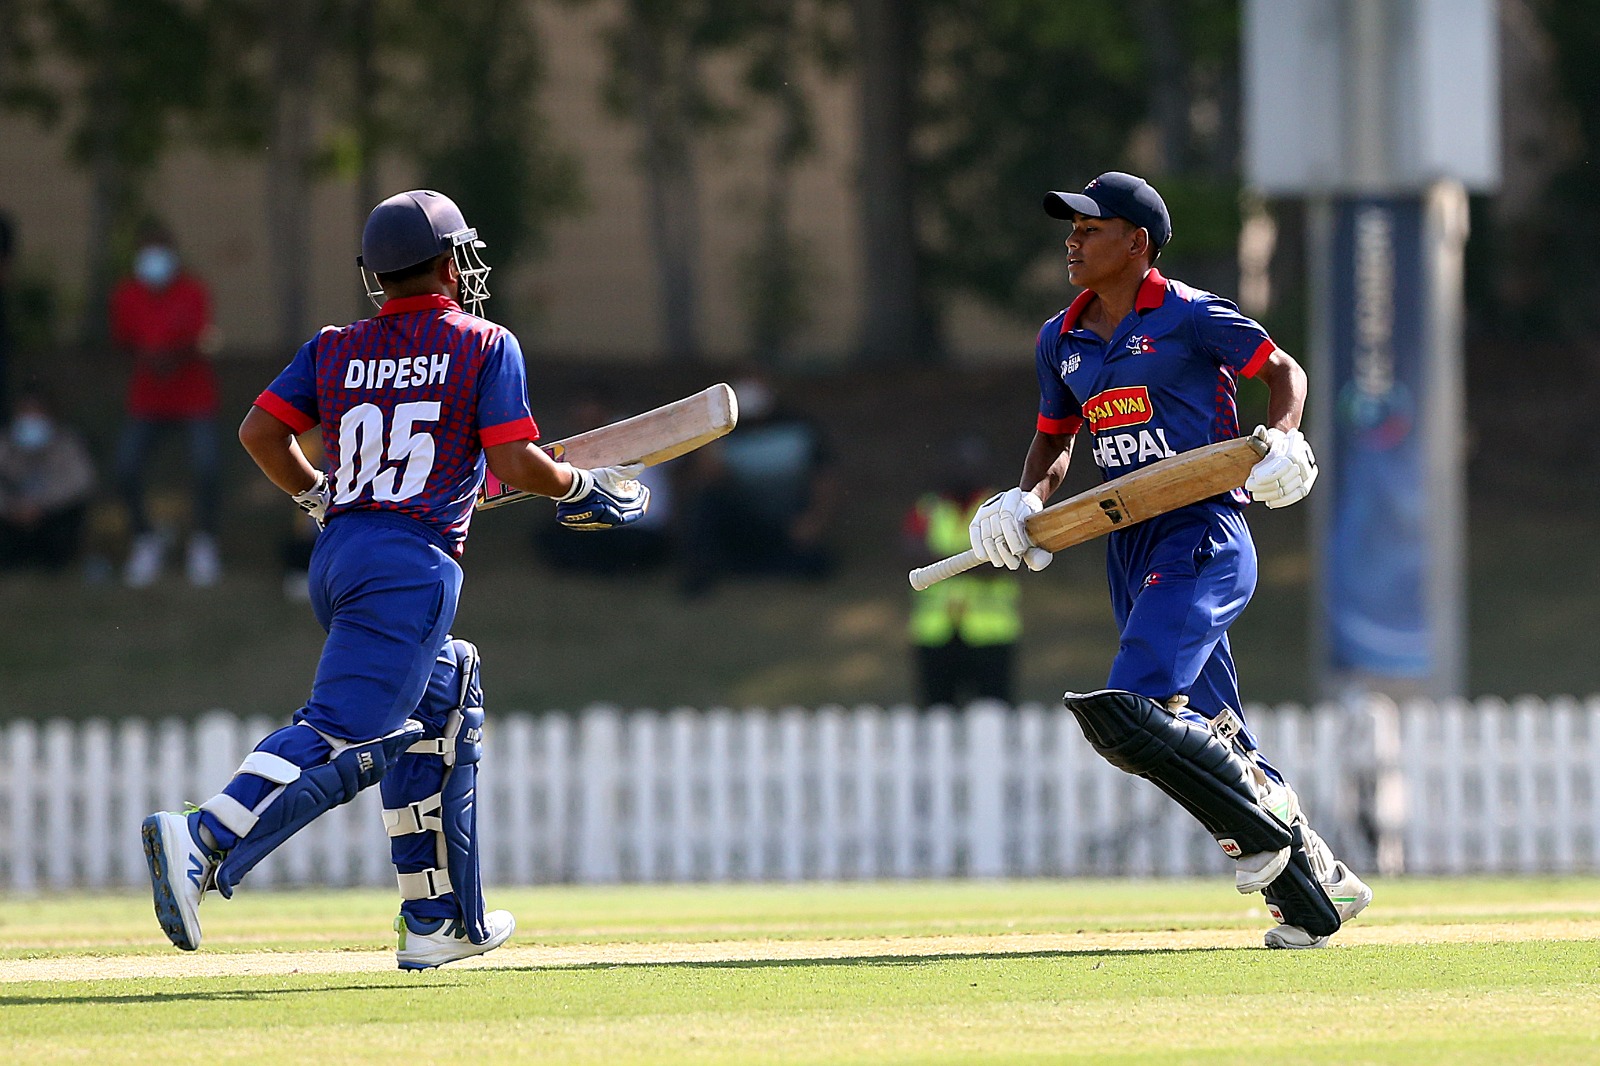 Nepal takes on Afghanistan in ACC U19 Asia Cup clash today